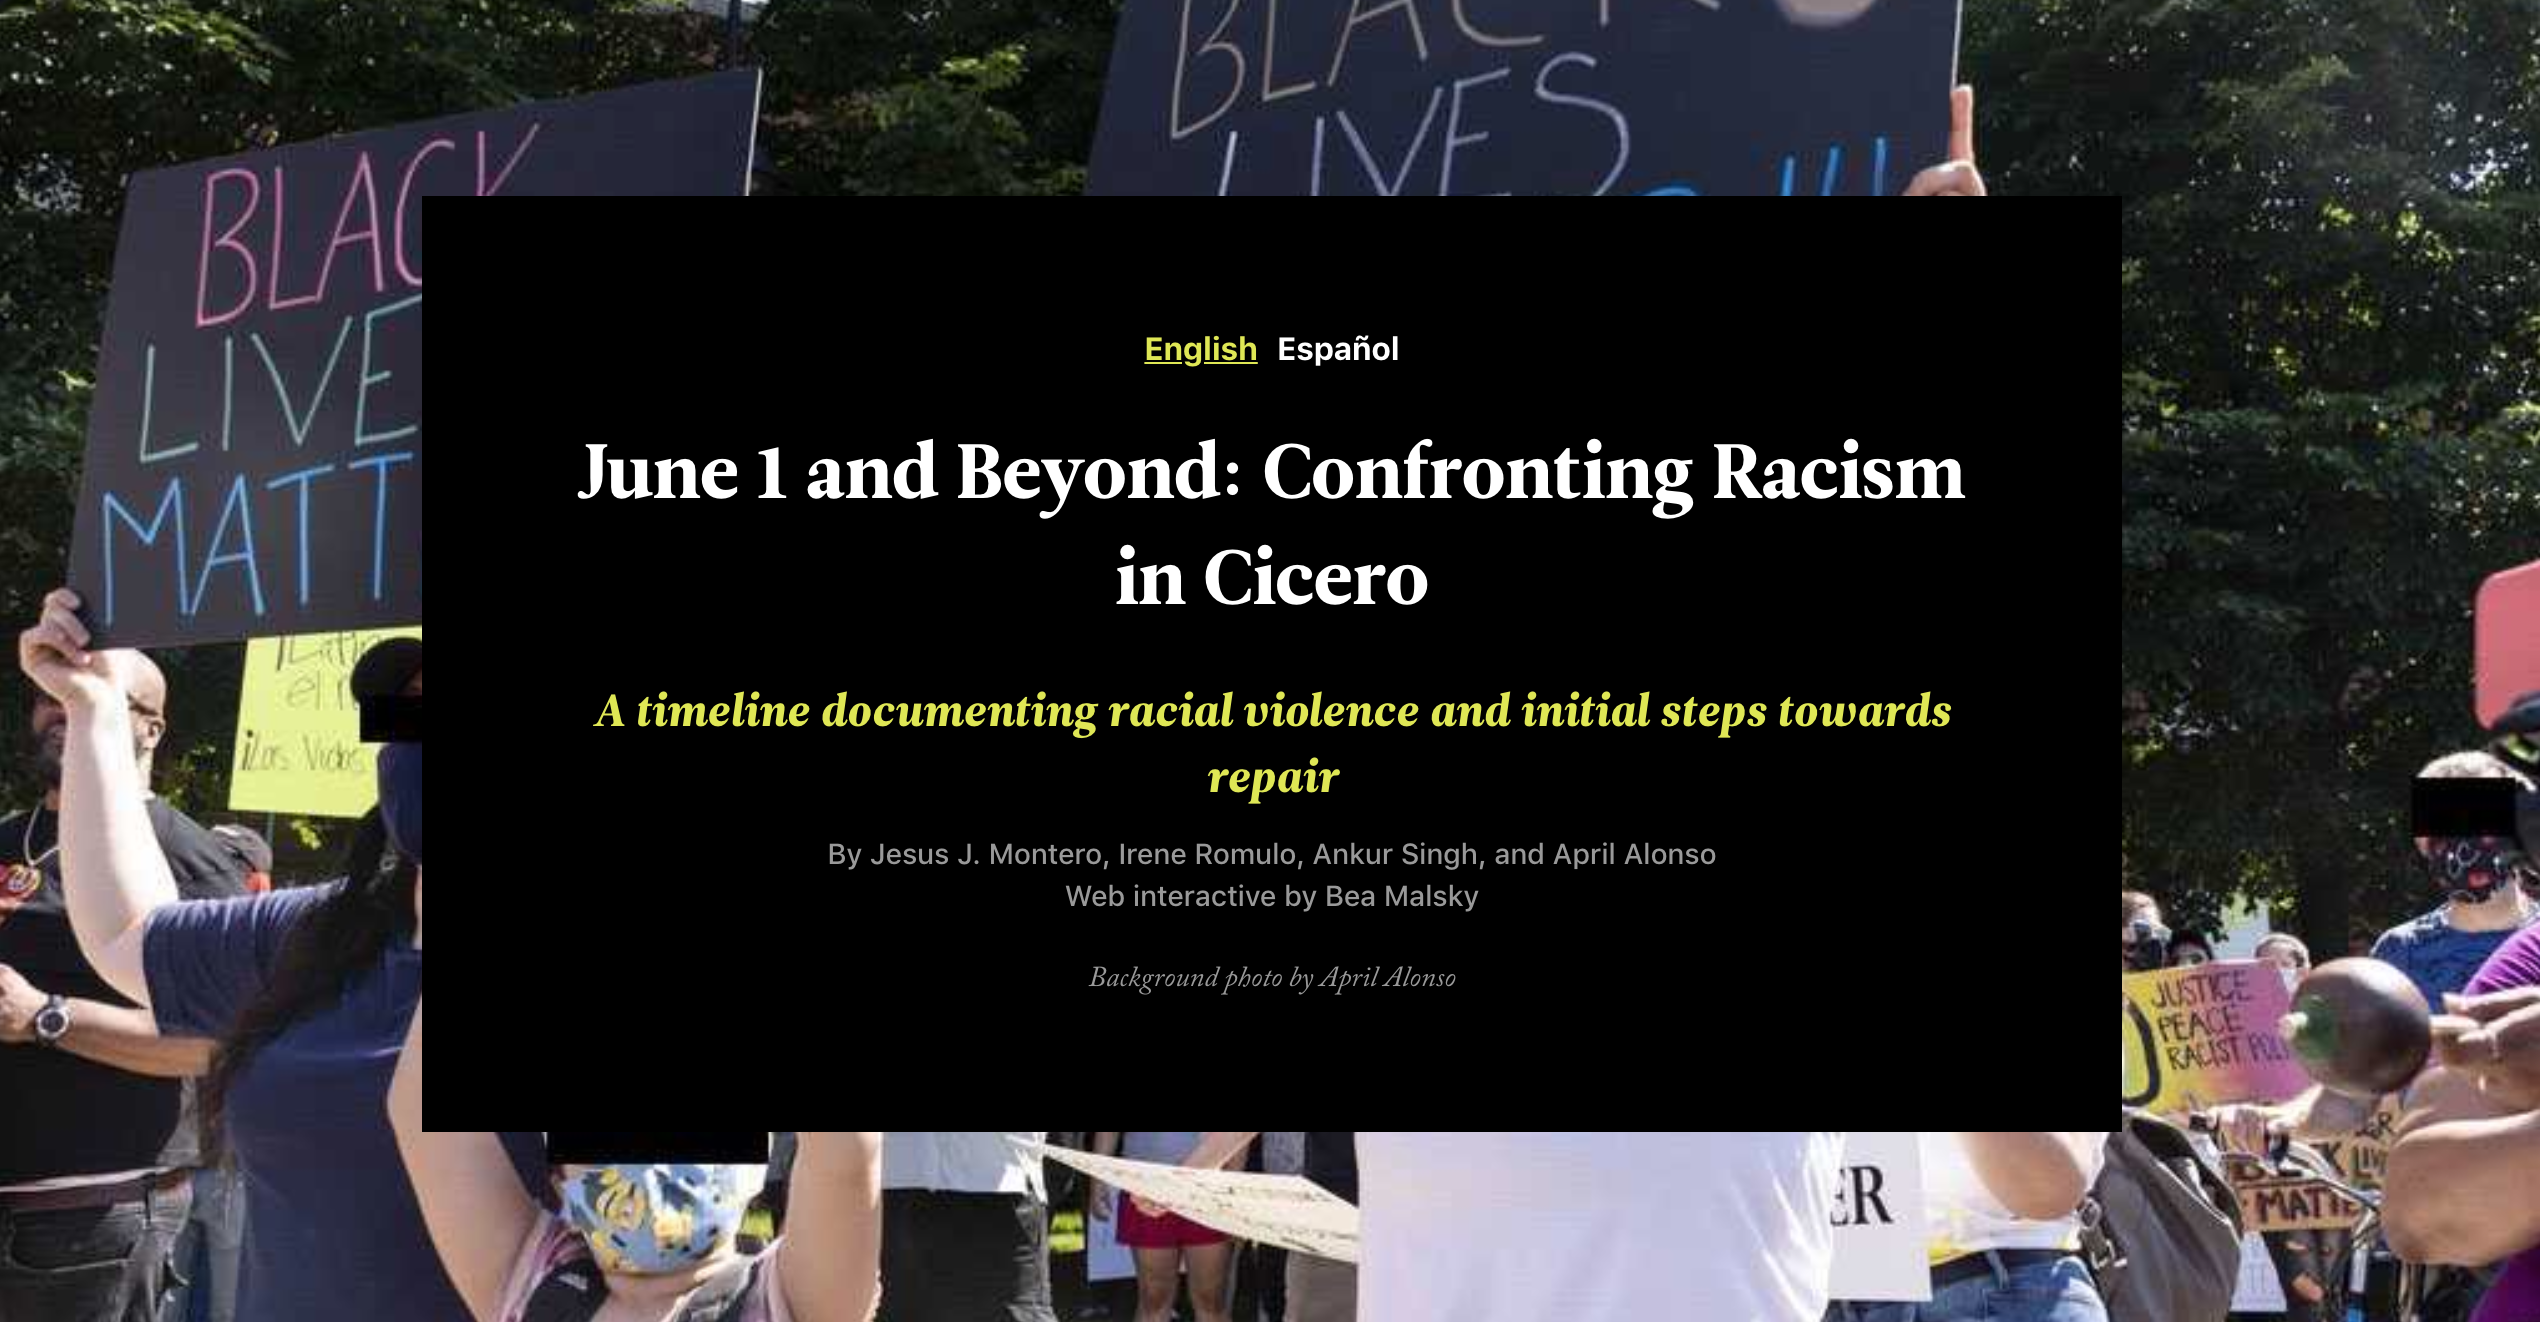 June 1 and Beyond: Confronting Racism in Cicero